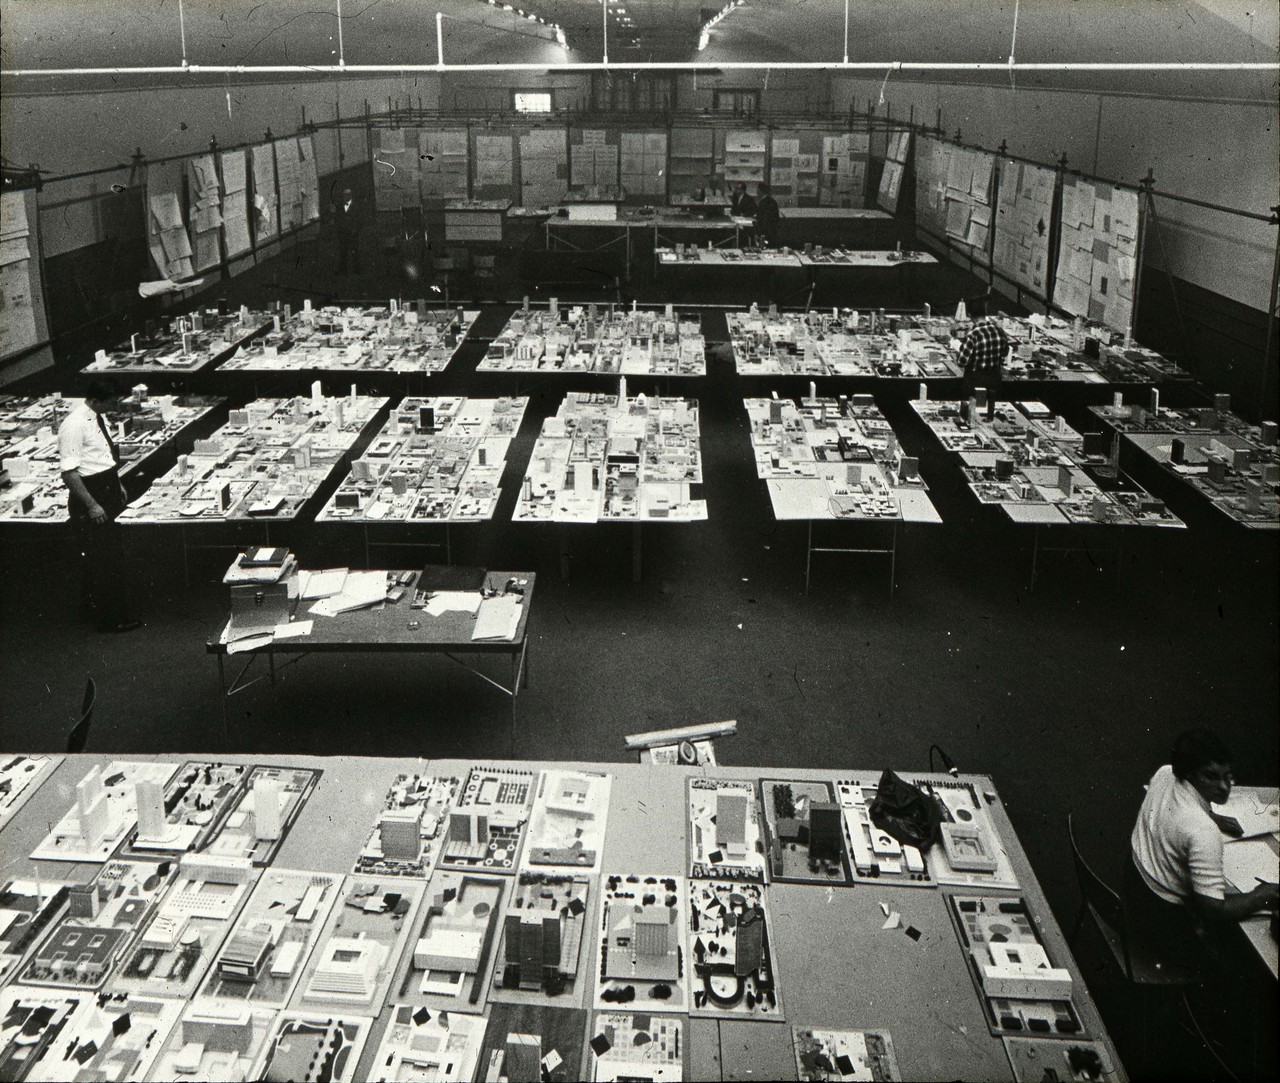 Architectural models at Horticultural Building, City Hall and Square Competition, Toronto, 1958